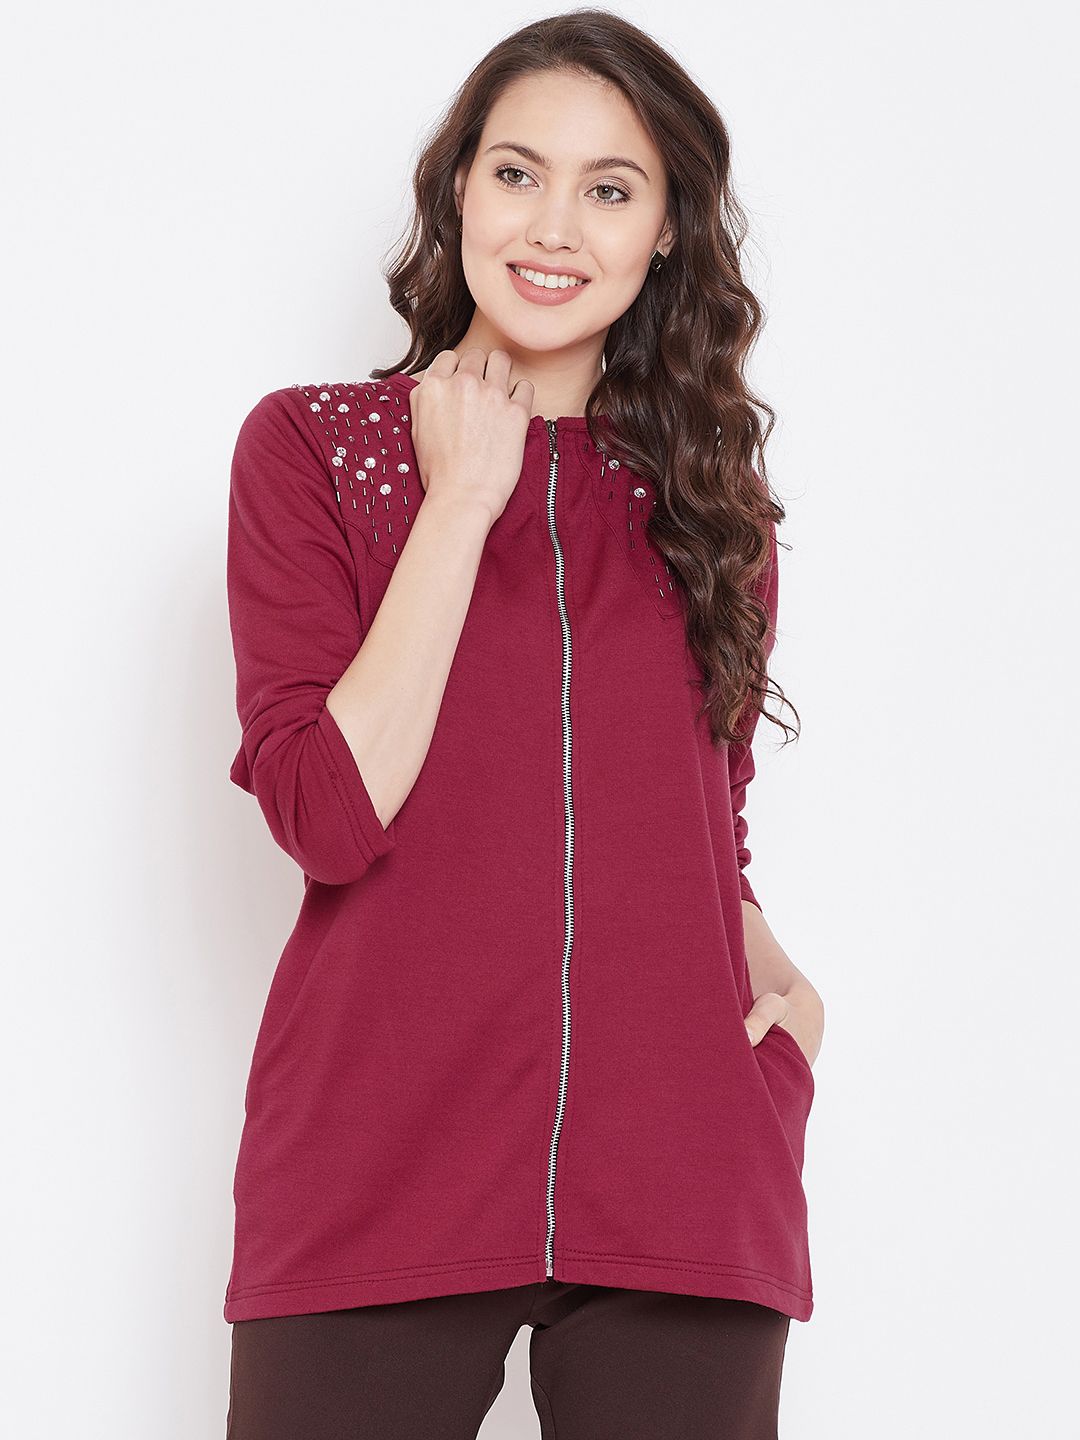 Belle Fille Women Maroon Solid Tailored Jacket Price in India